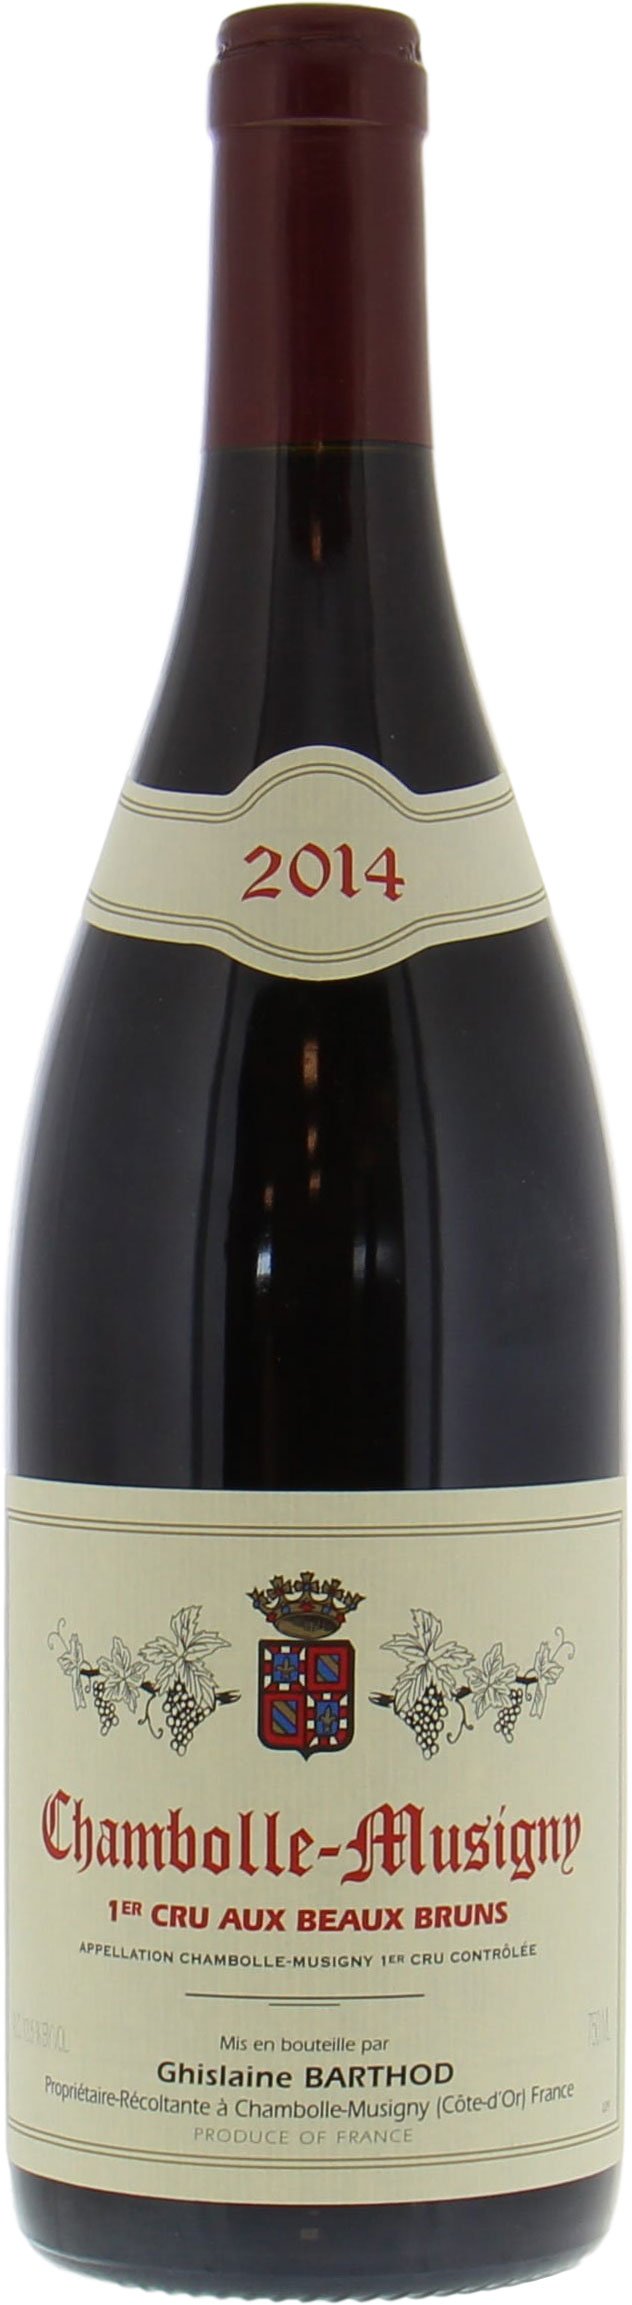 Ghislaine Barthod - Chambolle Musigny Aux Beaux Bruns 2014 Perfect